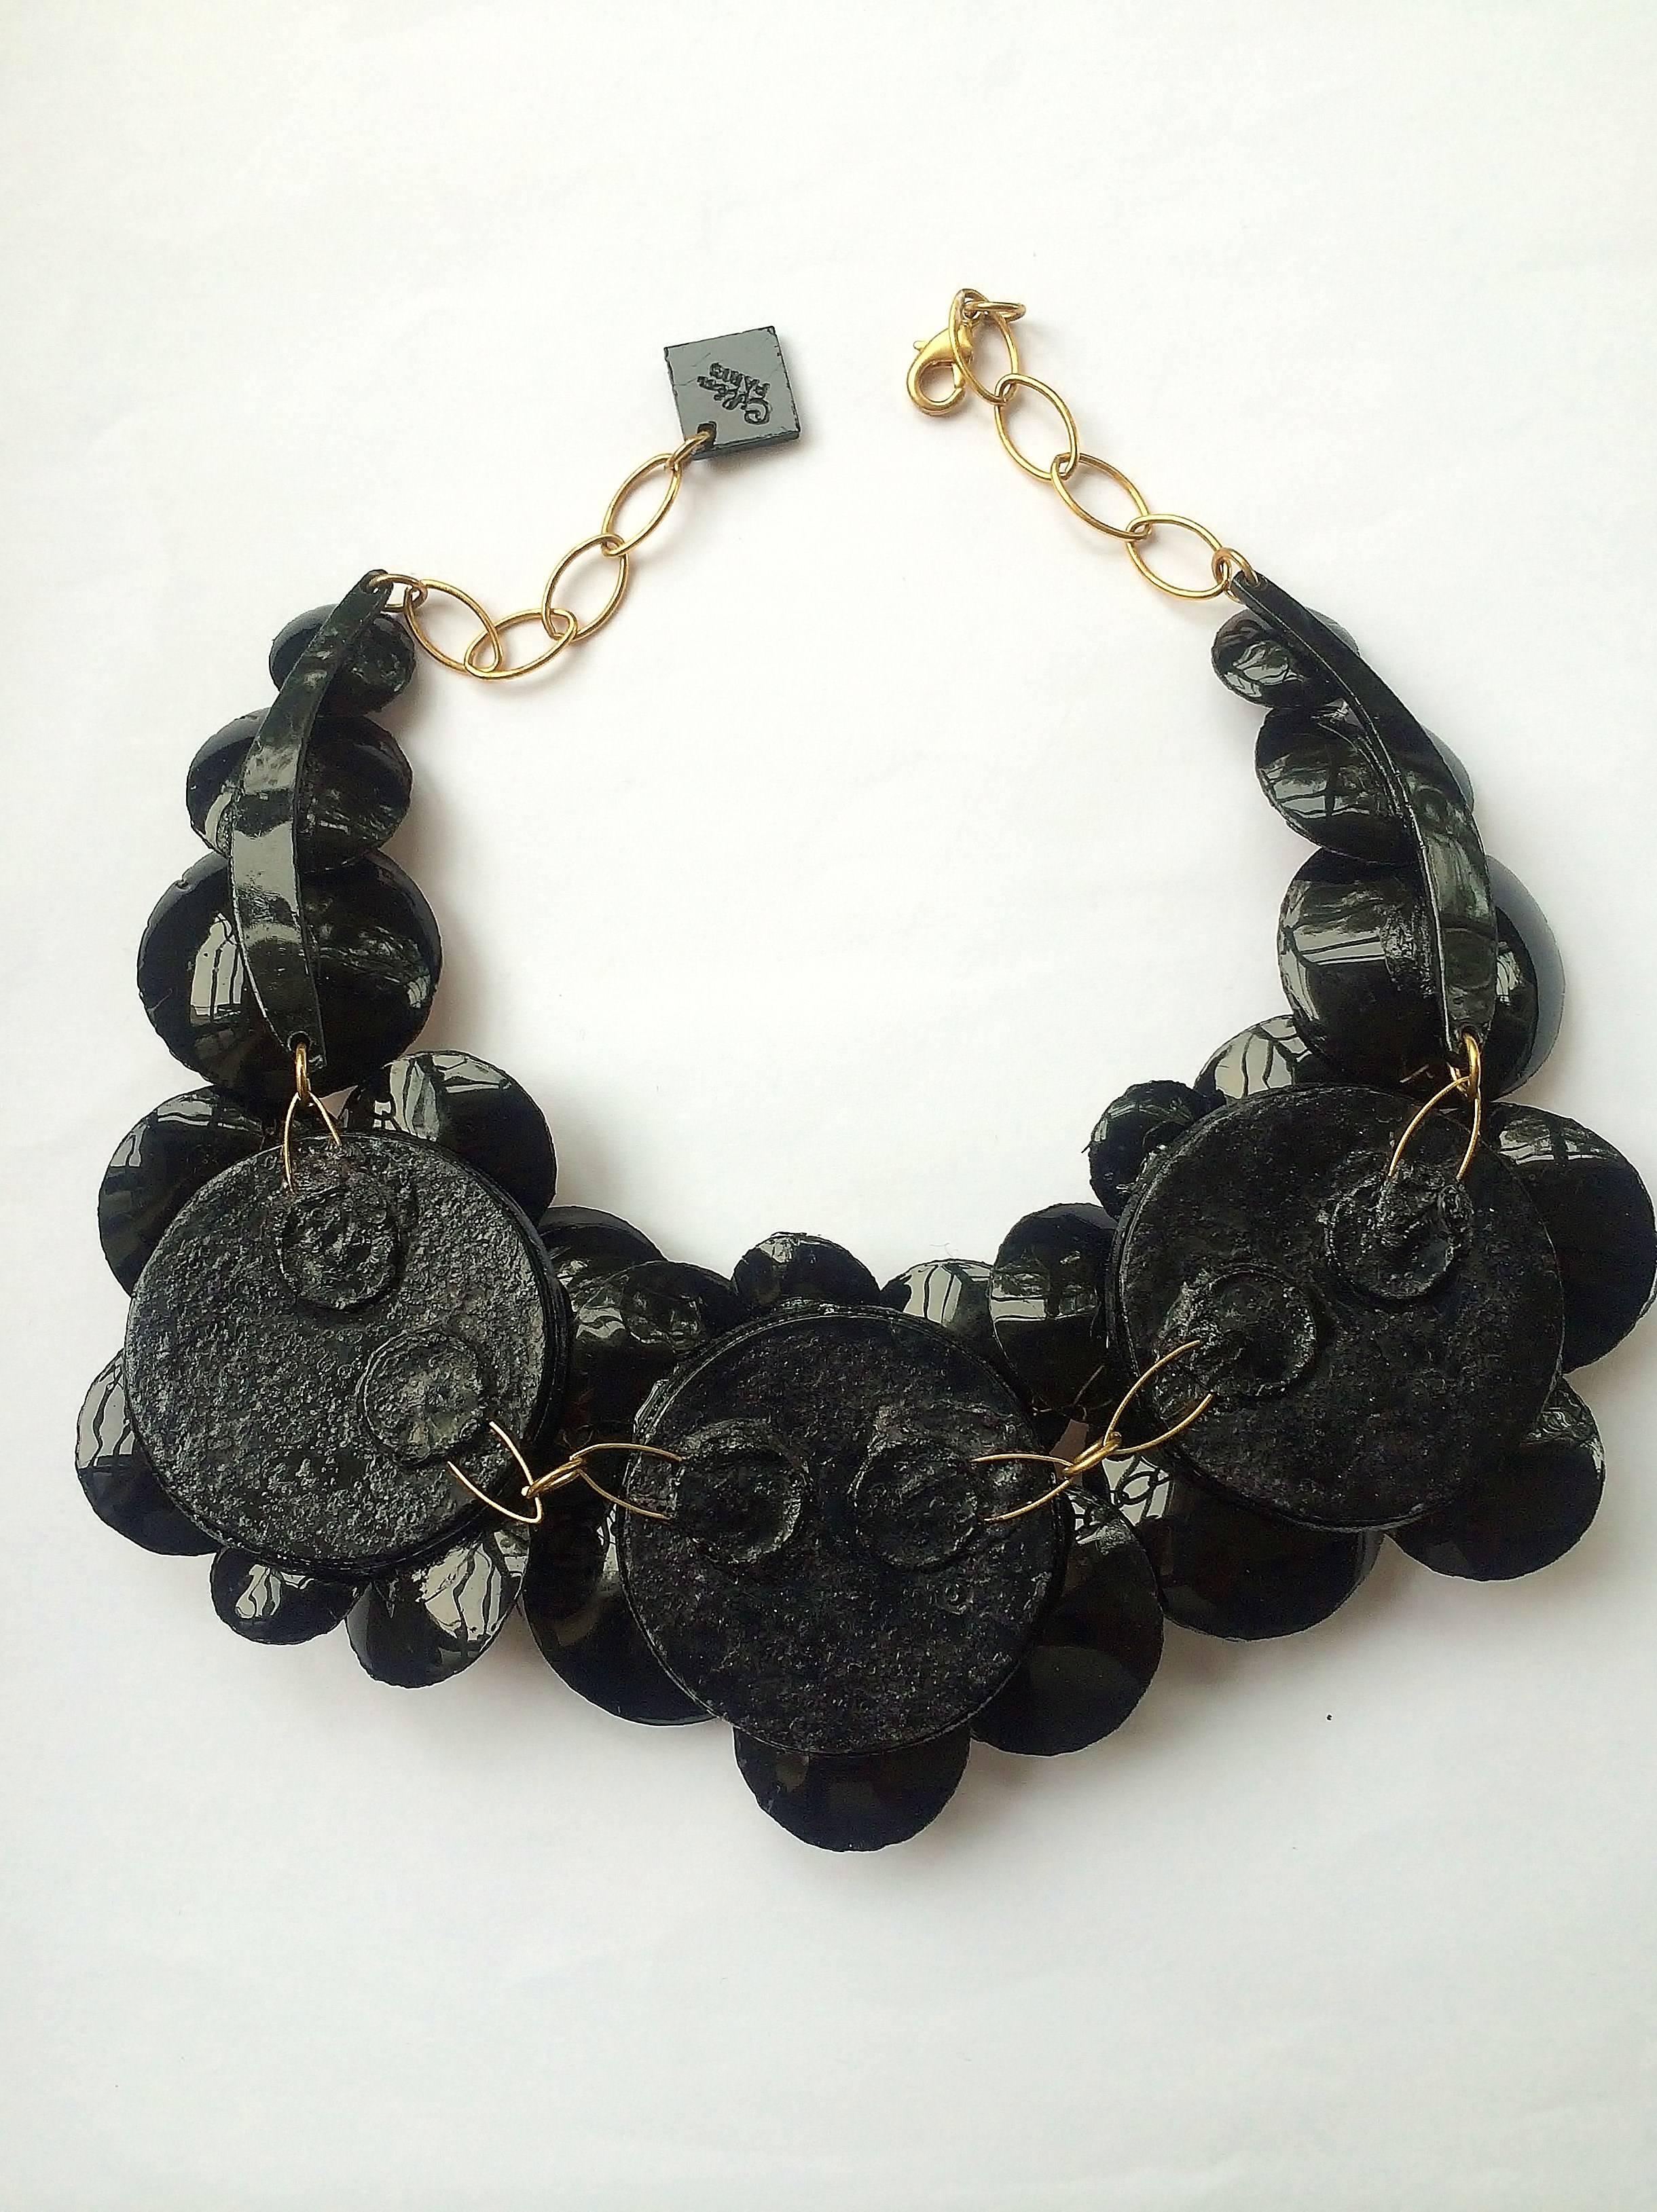 Light and easy to wear, this handmade artisanal necklace was made in Paris by Cilea. Concave black resin discs embellished with metallic bronze leaf, clustered together to form a powerful statement piece.
A wonderful winter necklace, looks great